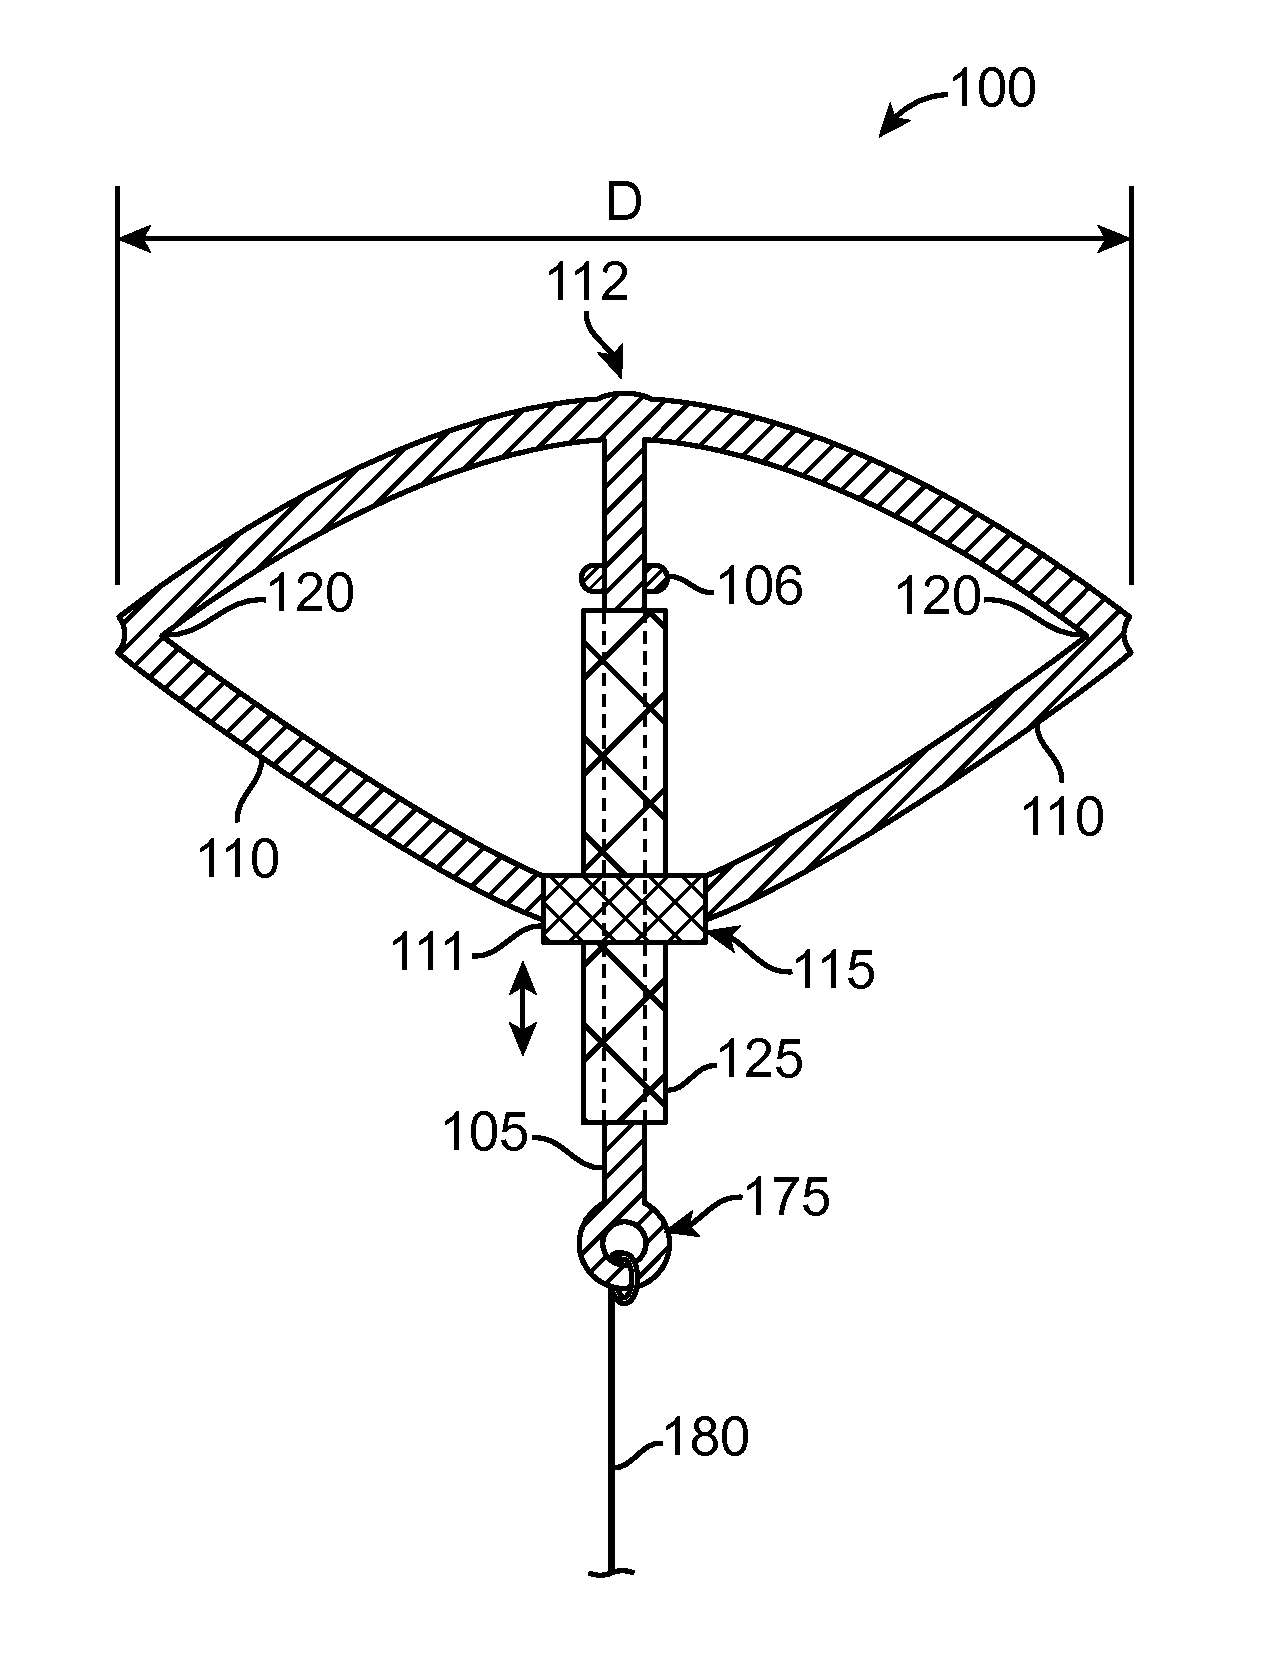 Intra-uterine device and related methods